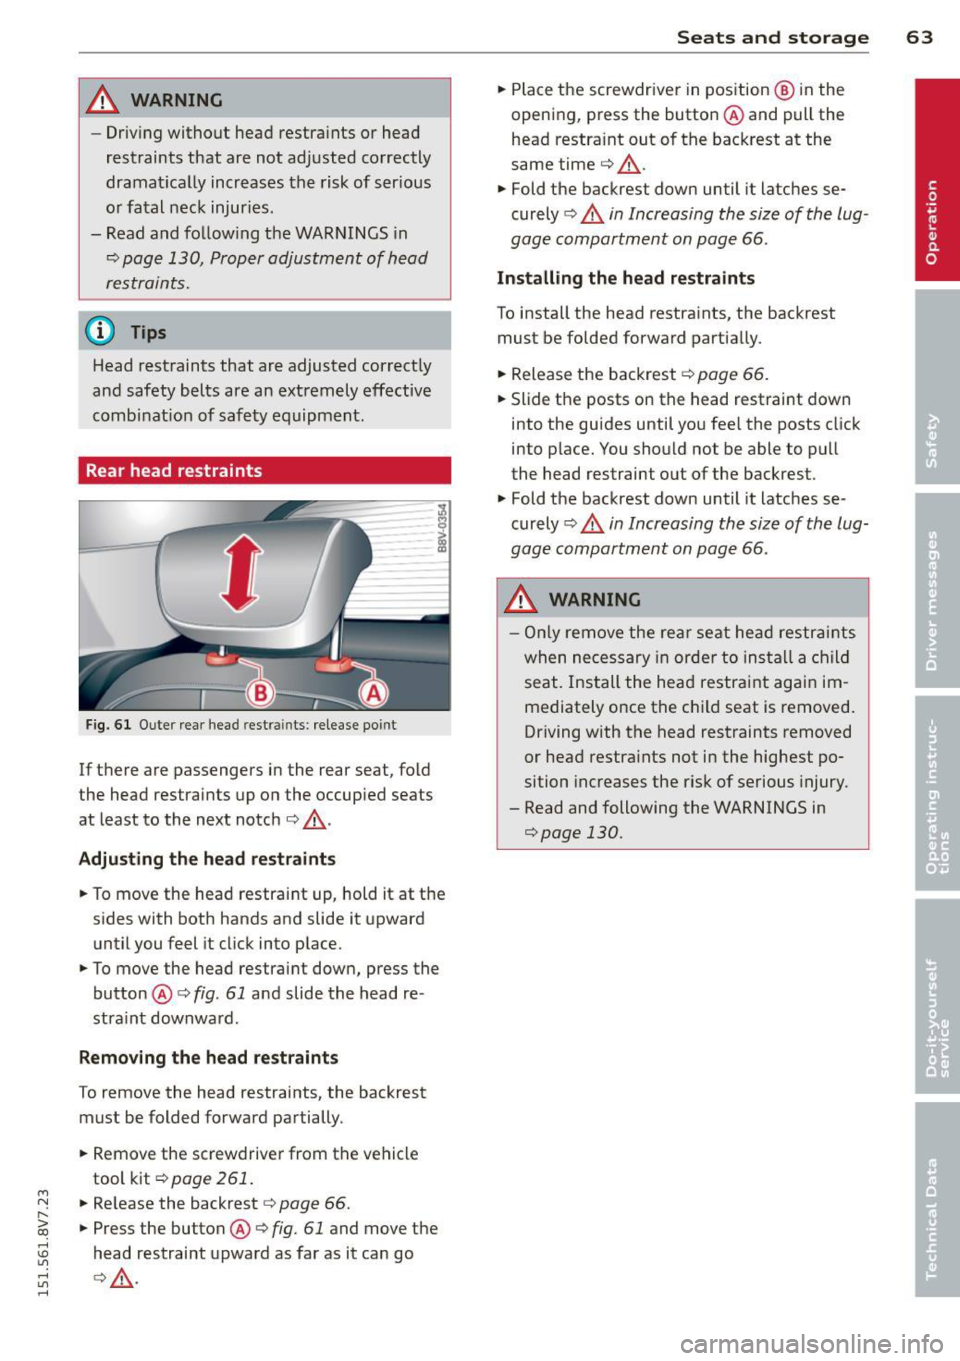 AUDI A3 CABRIOLET 2015  Owners Manual ...., 
N 
" > co 
rl I.O 
" rl 
" rl 
_& WARNING 
-Driving without  head  restraints  or  head 
restraints  that  are  not  adjusted  correctly 
dramatically  increases  the  risk of serious 
or  fa